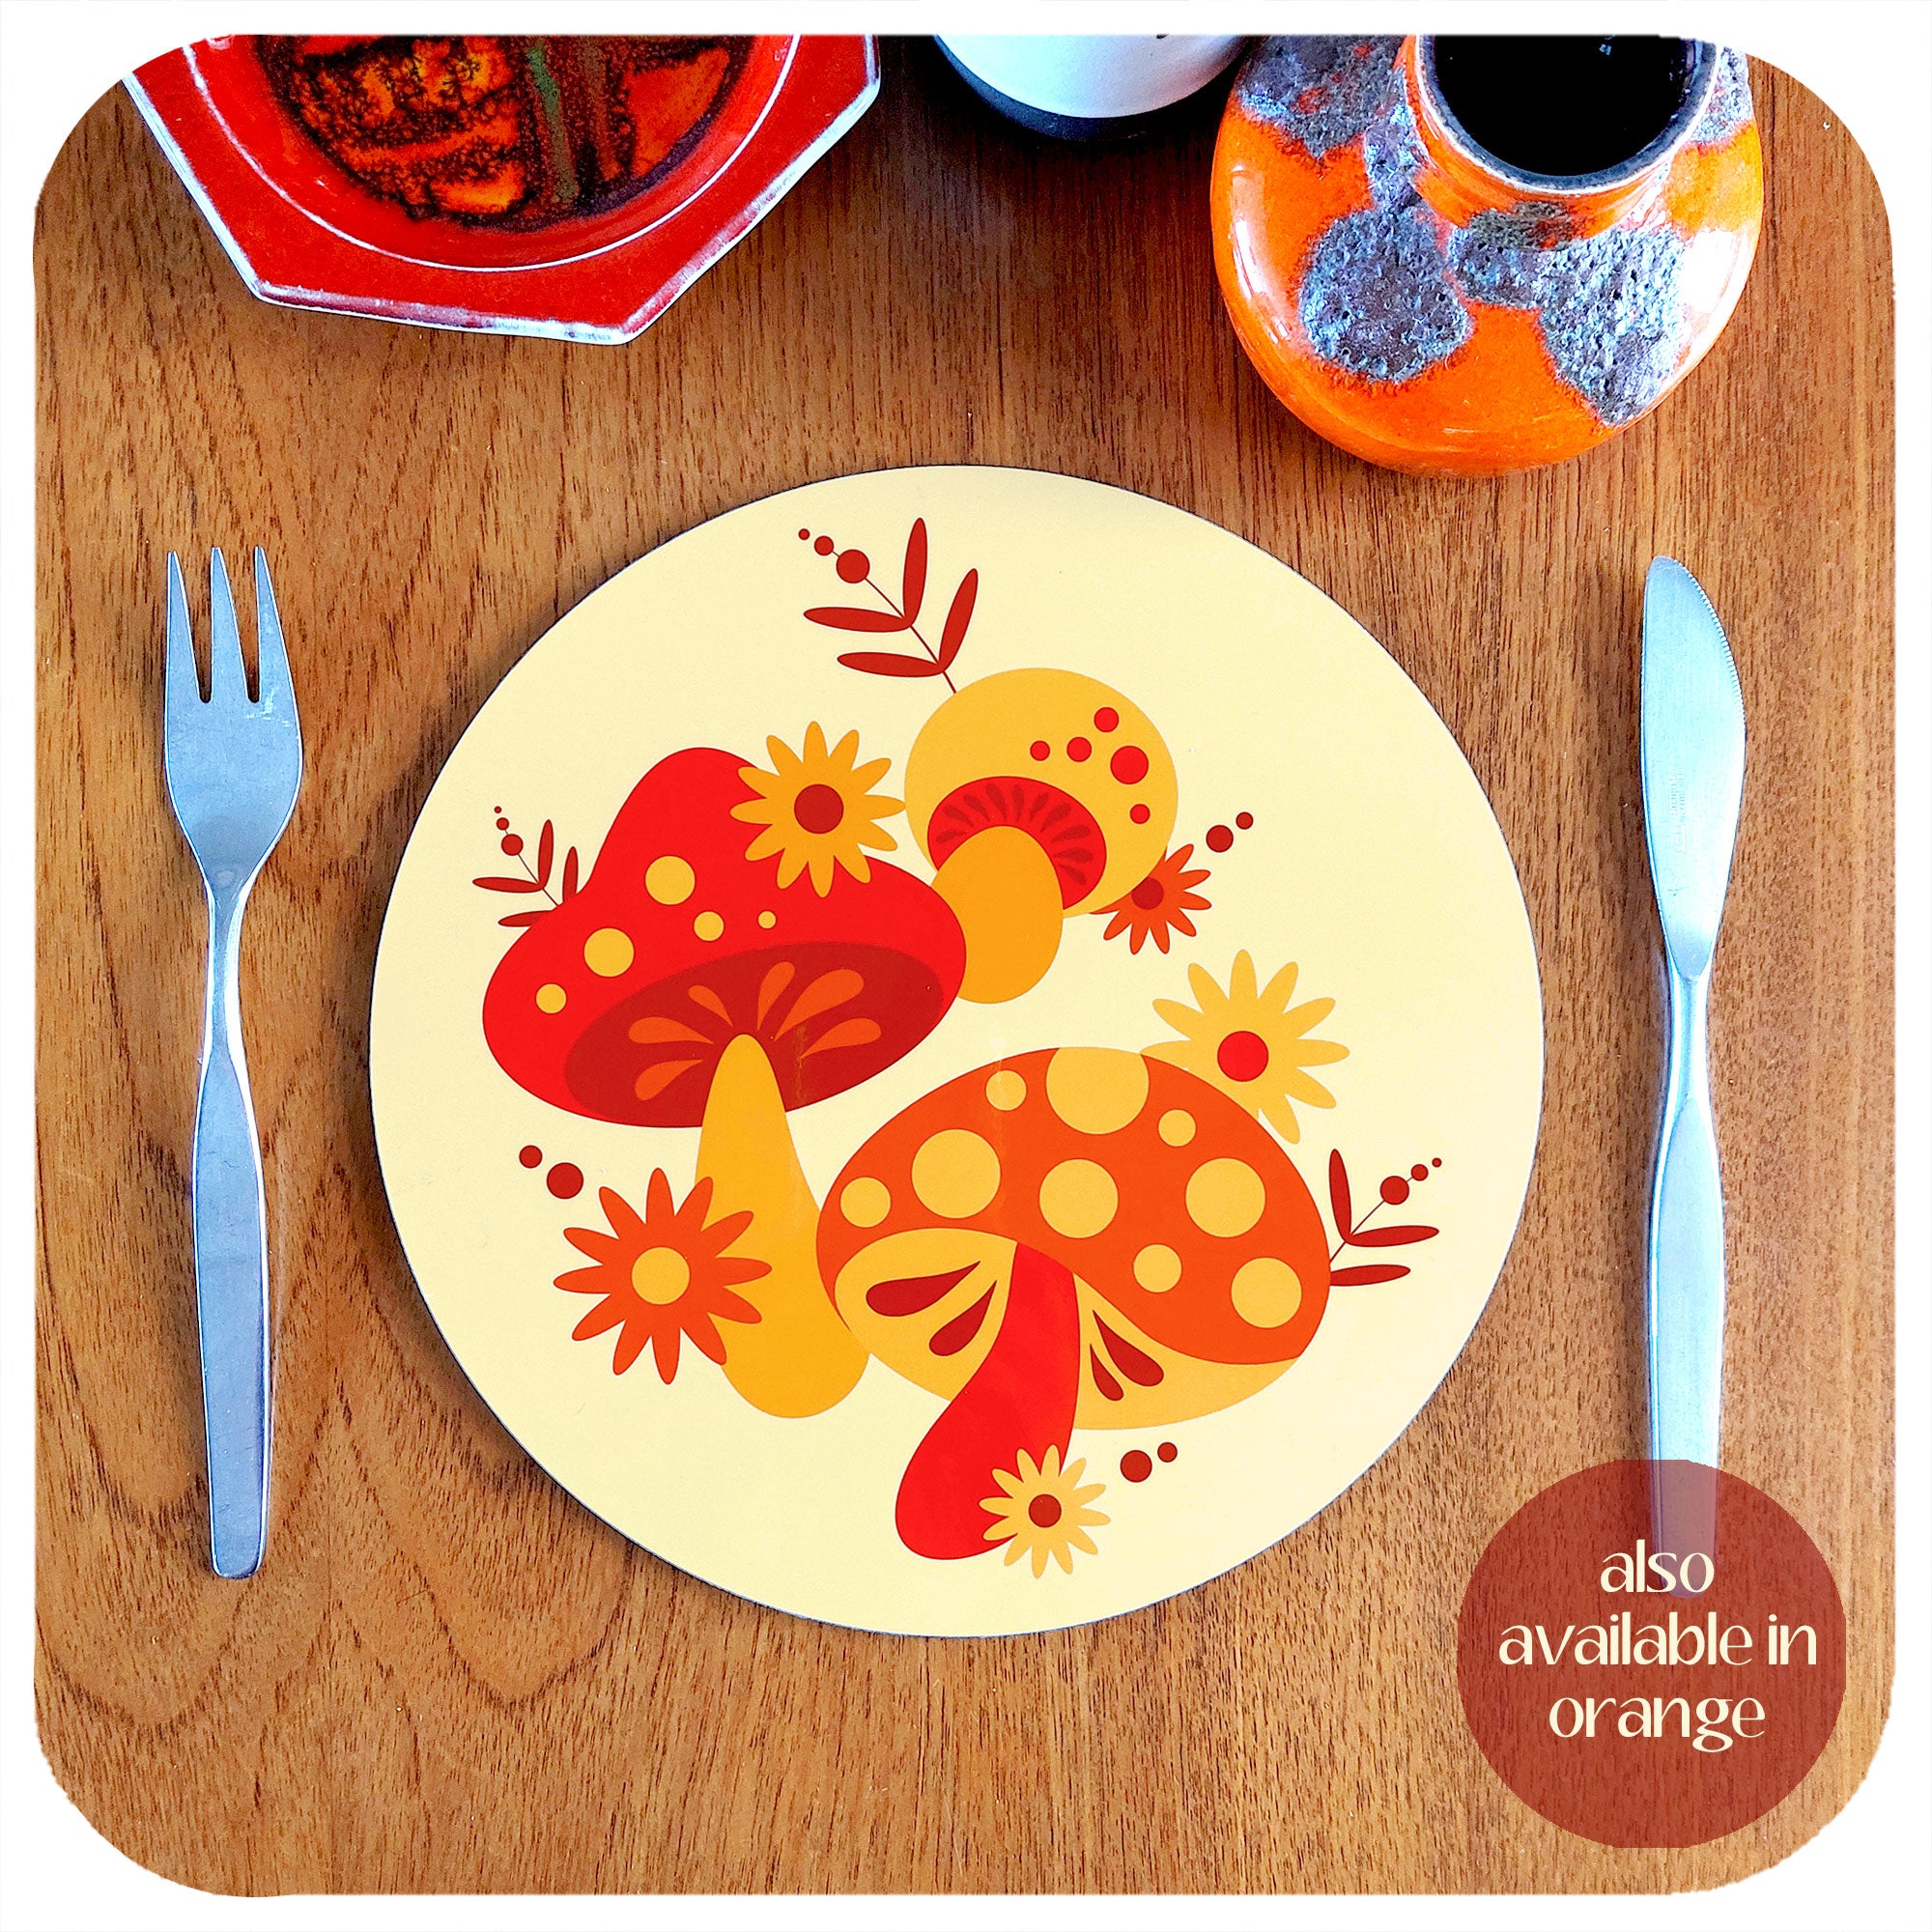 A round, 70s style placemat featuring retro mushrooms sits on a teak table with cutlery and vintage pottery pieces. Text in lower righthand corner reads: also available in orange | The Inkabilly Emporium